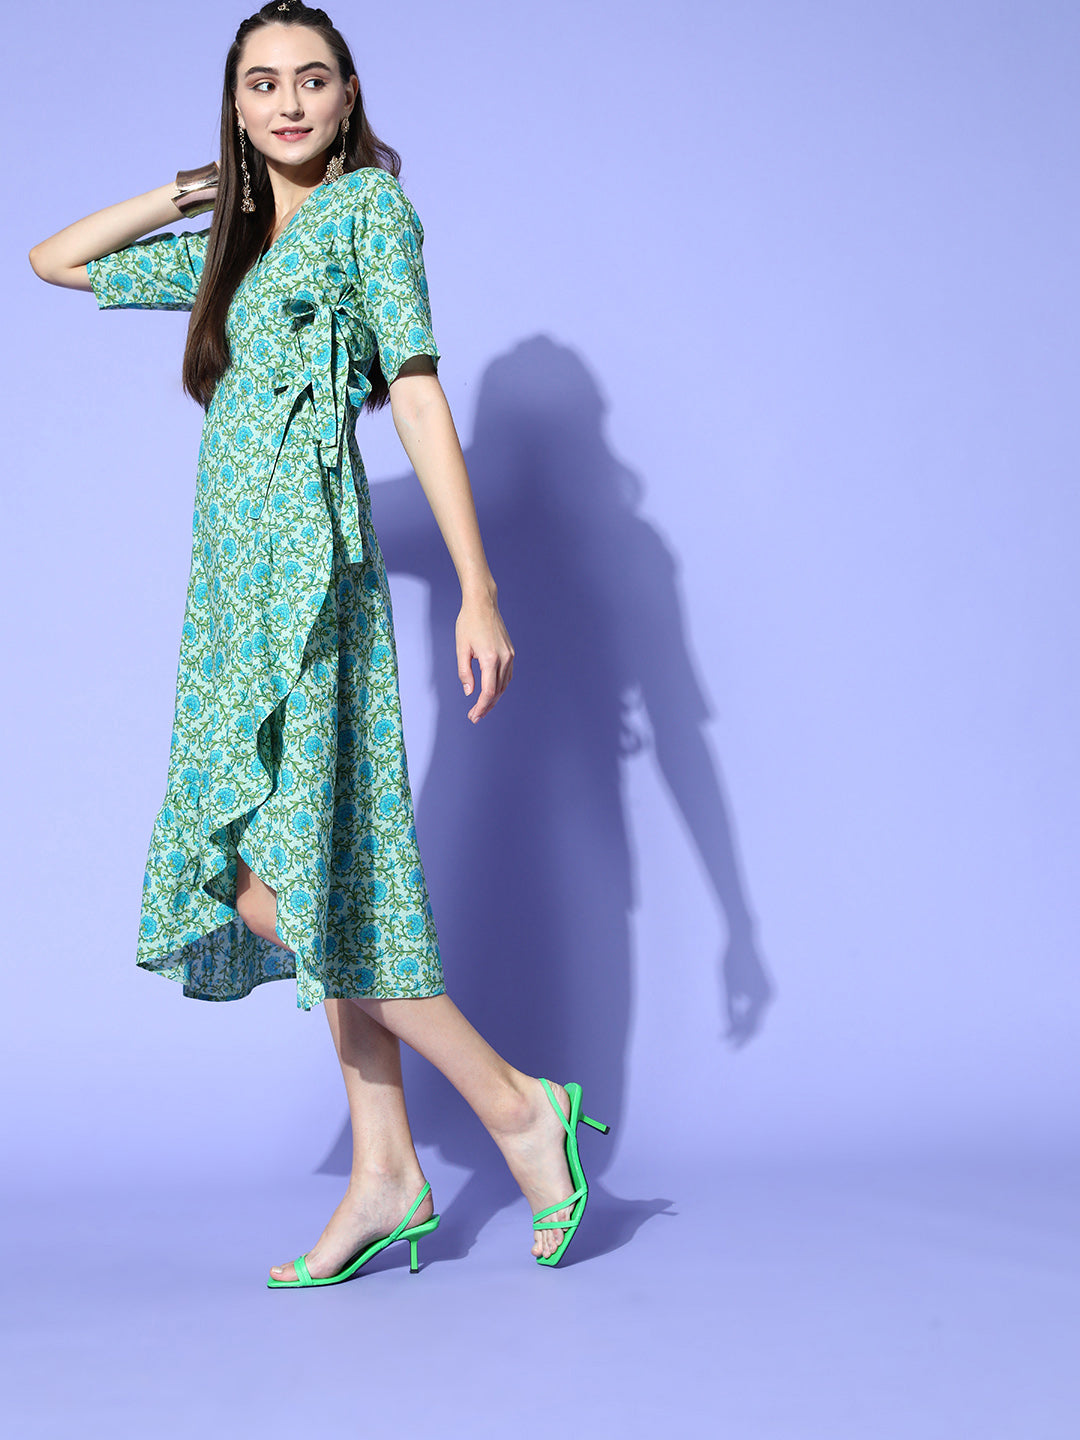 Shop Stylish Green Floral Printed Cotton Embroidered Angrakha Style Frill Flared Wrap Dress with Tie-Up Belt at Waist for Girls Online at Jaipur Kurti